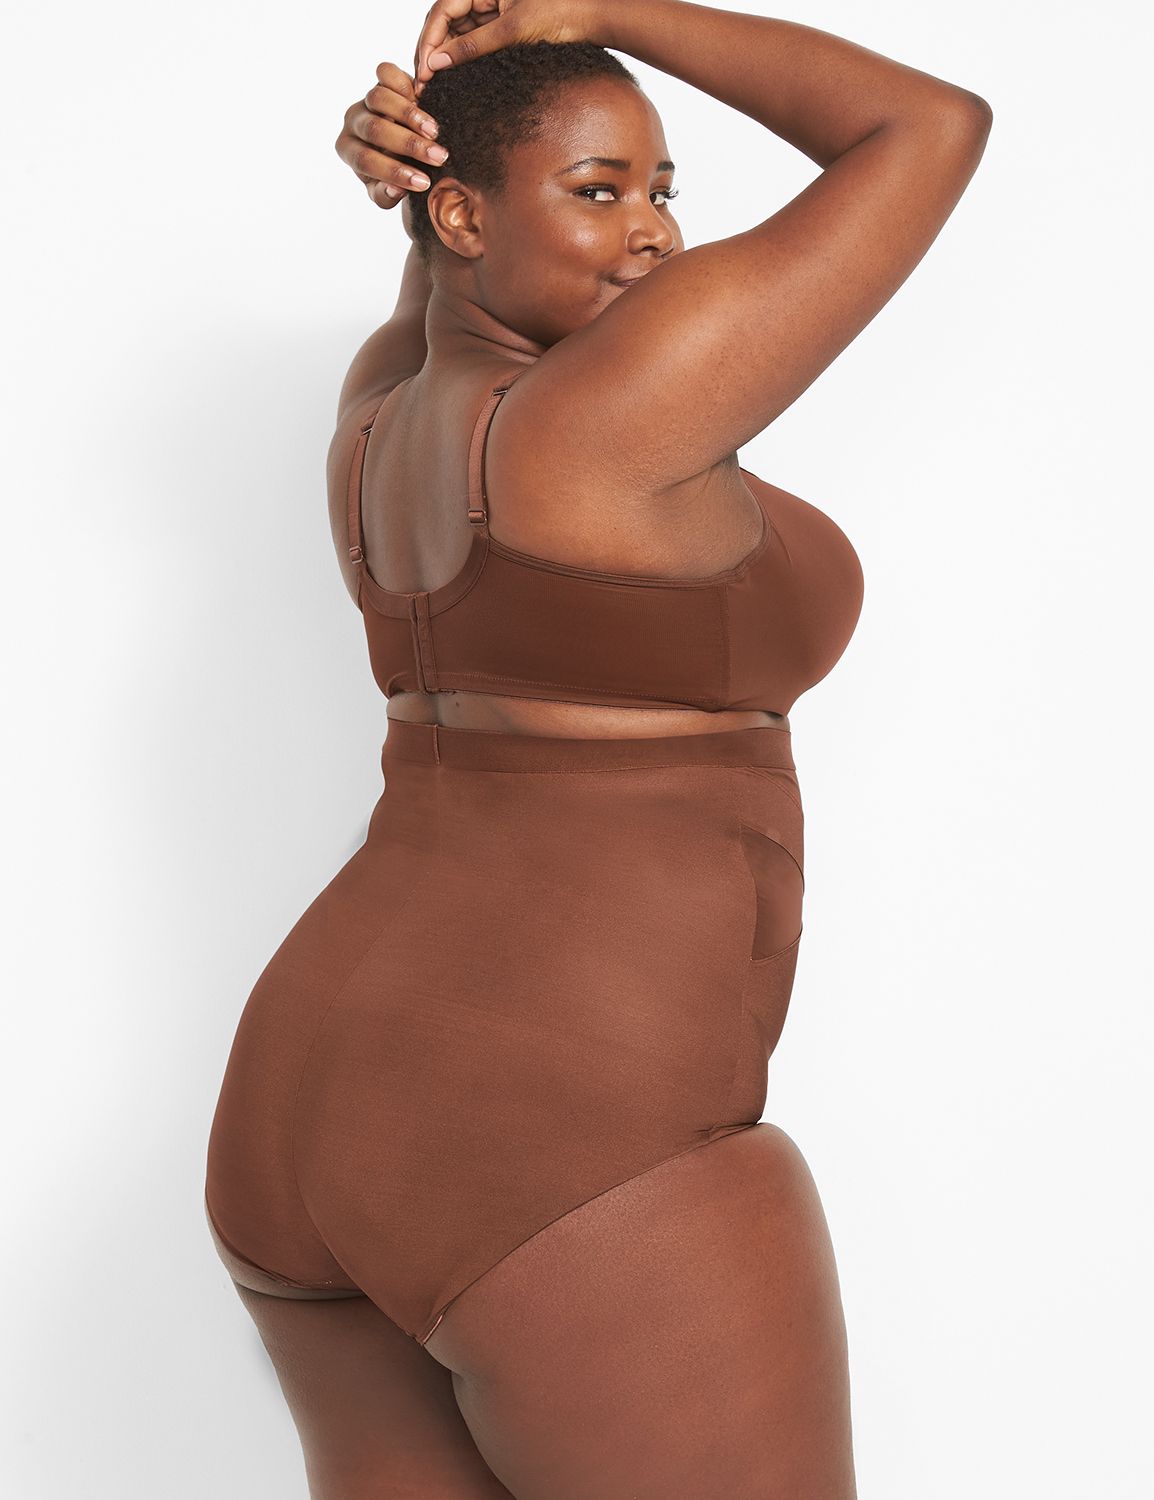 The Shapewear Category is Ready for Retail - Leap Inc.